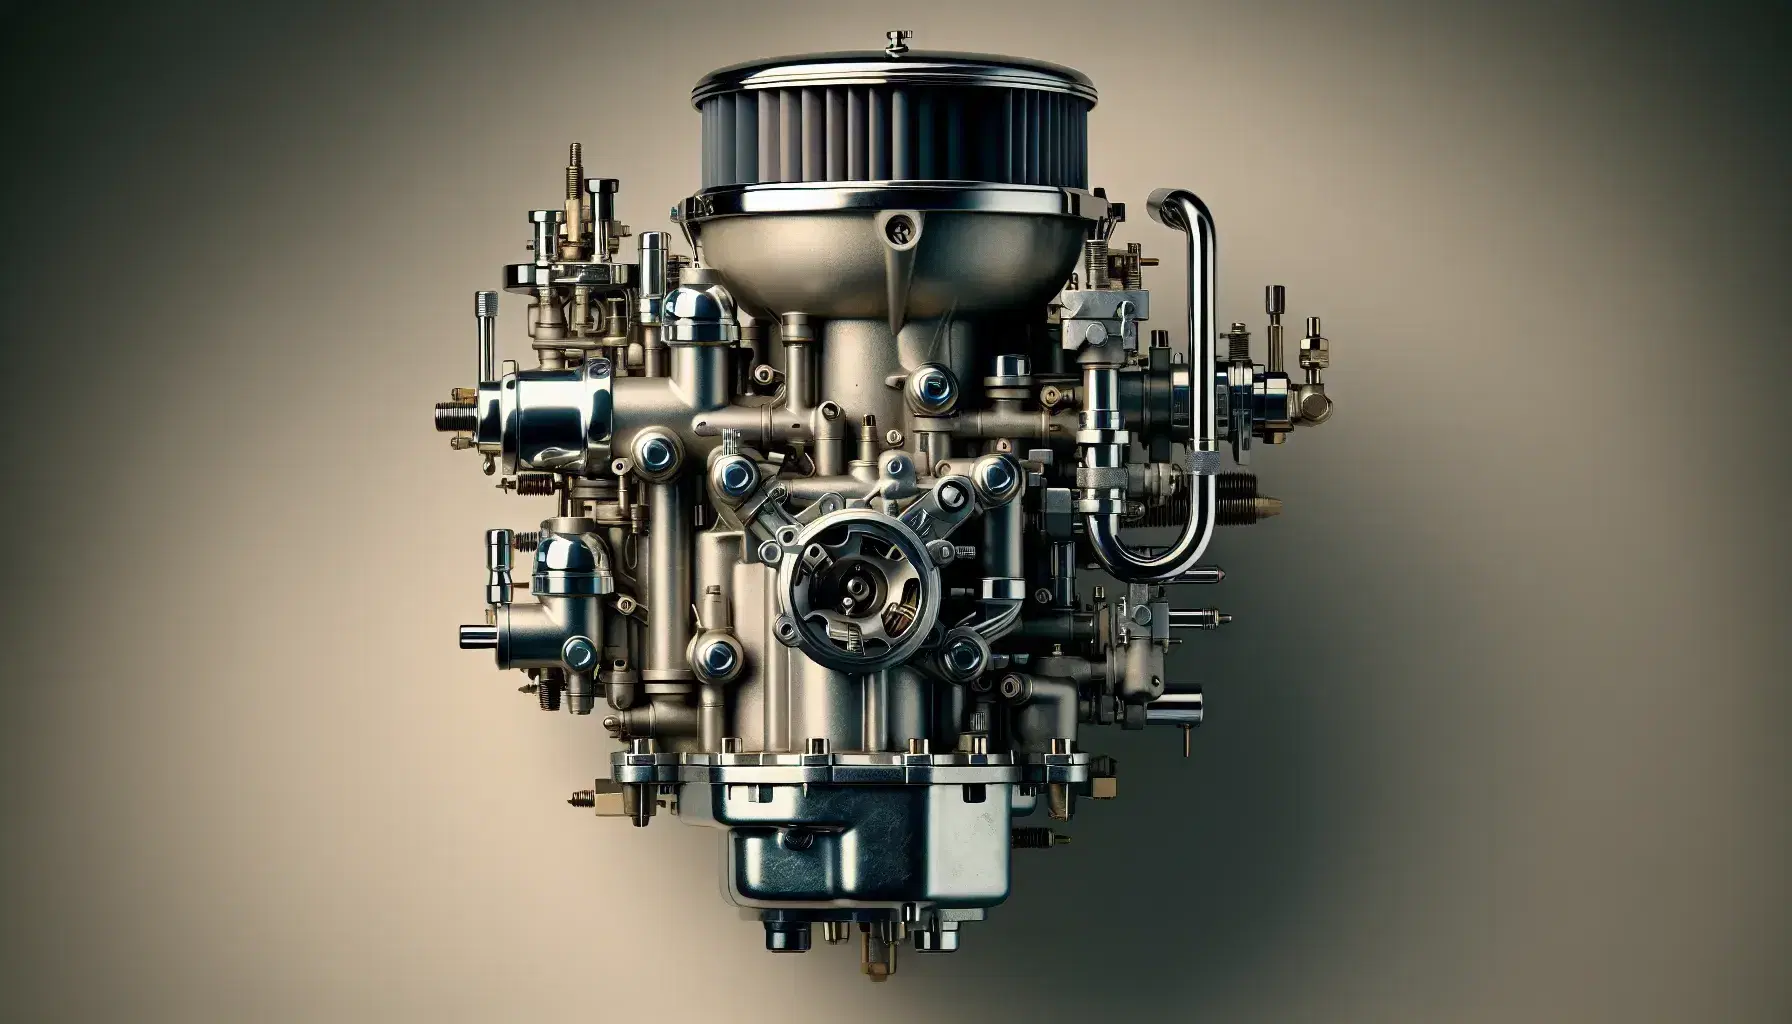 Classic carburetor of internal combustion engine, metal cylindrical body with filters and pipes, on neutral background.